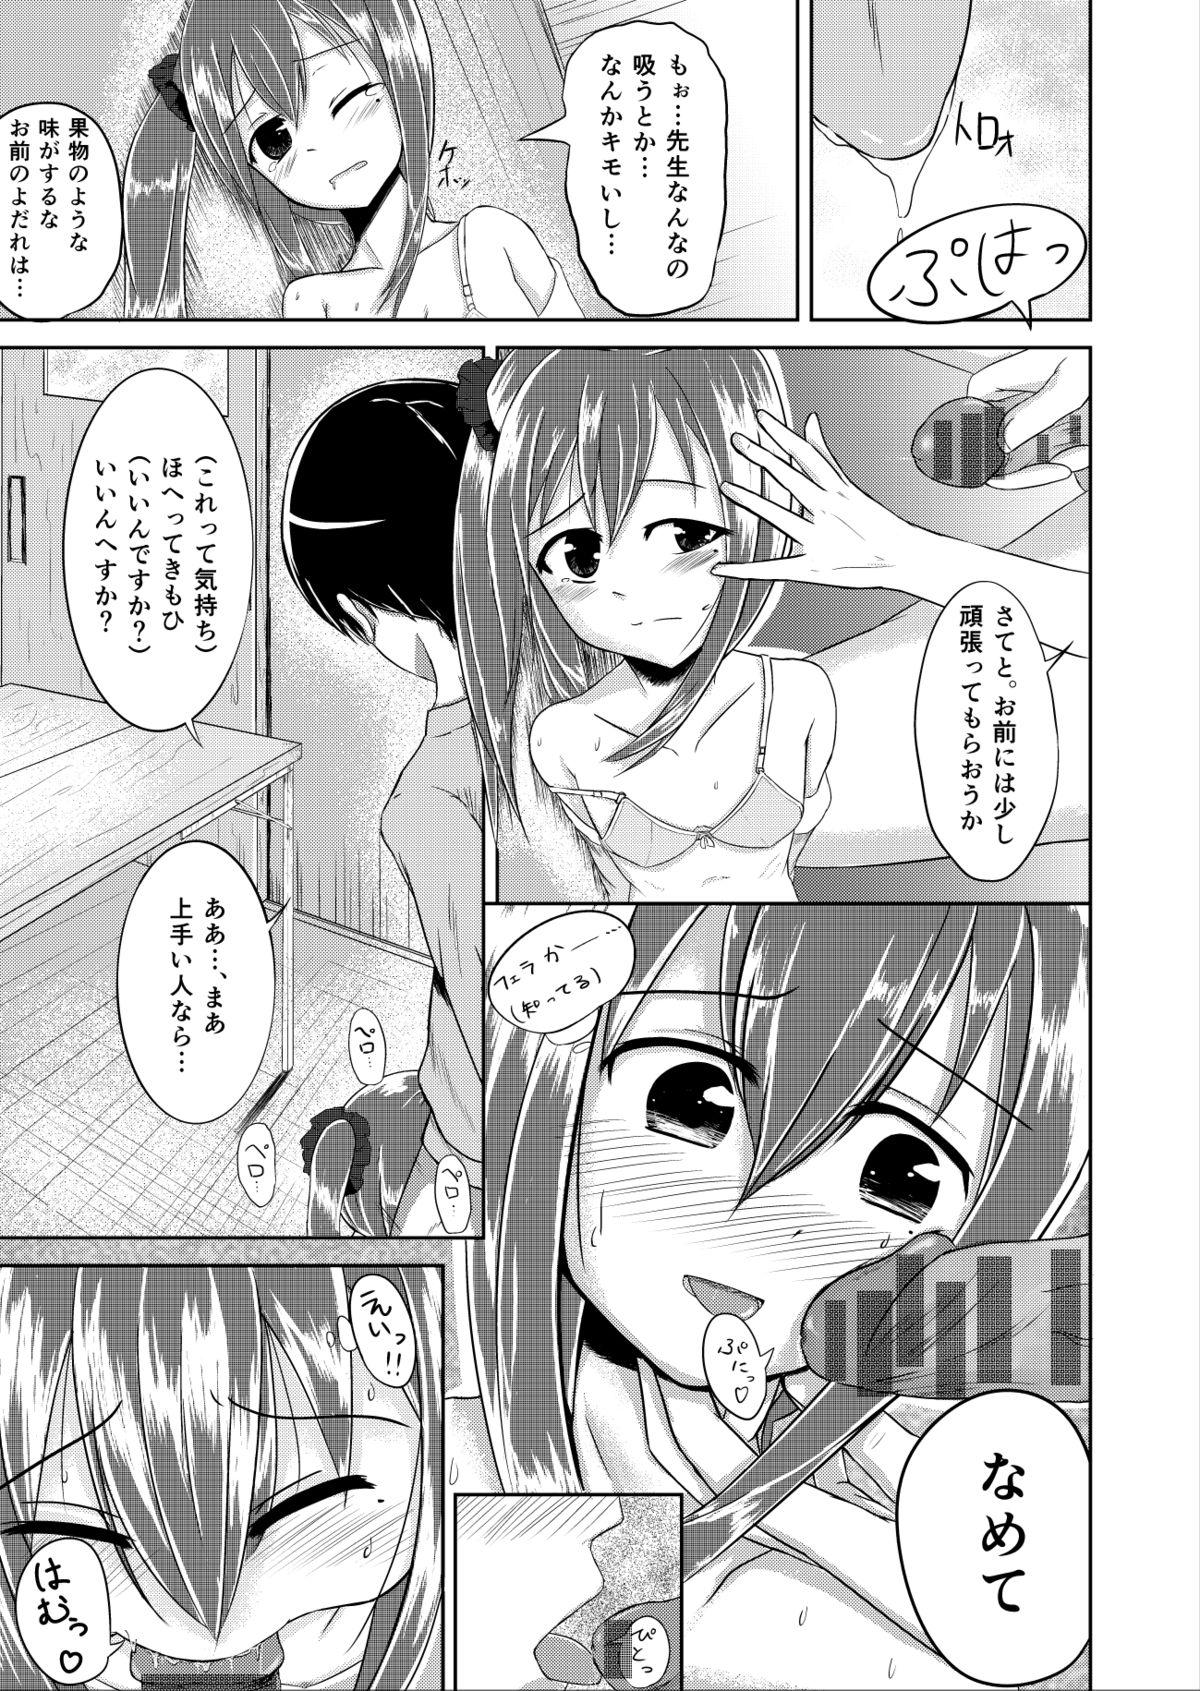 Brother Sister [Rorioiru] 夕方の(Hな)友達 Foreplay - Page 7